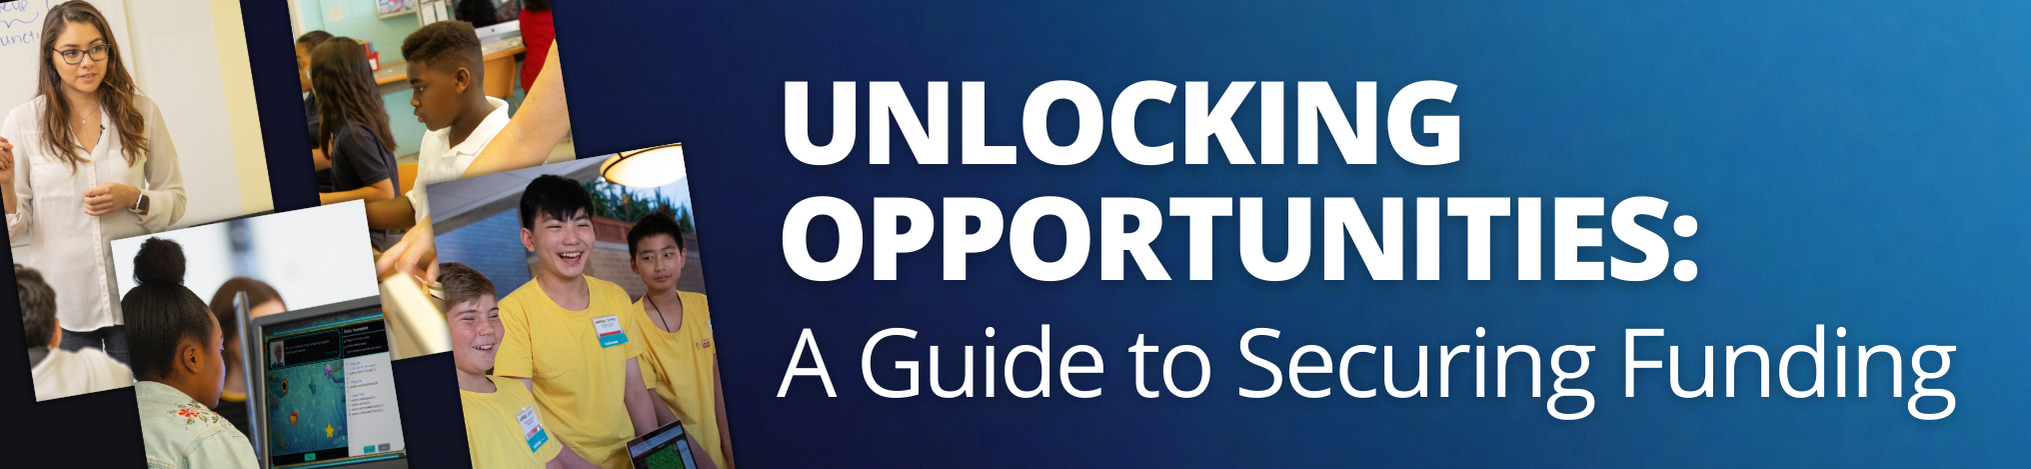 Unlocking Opportunities: A Guide to Securing Funding for Your School's Computer Science Program